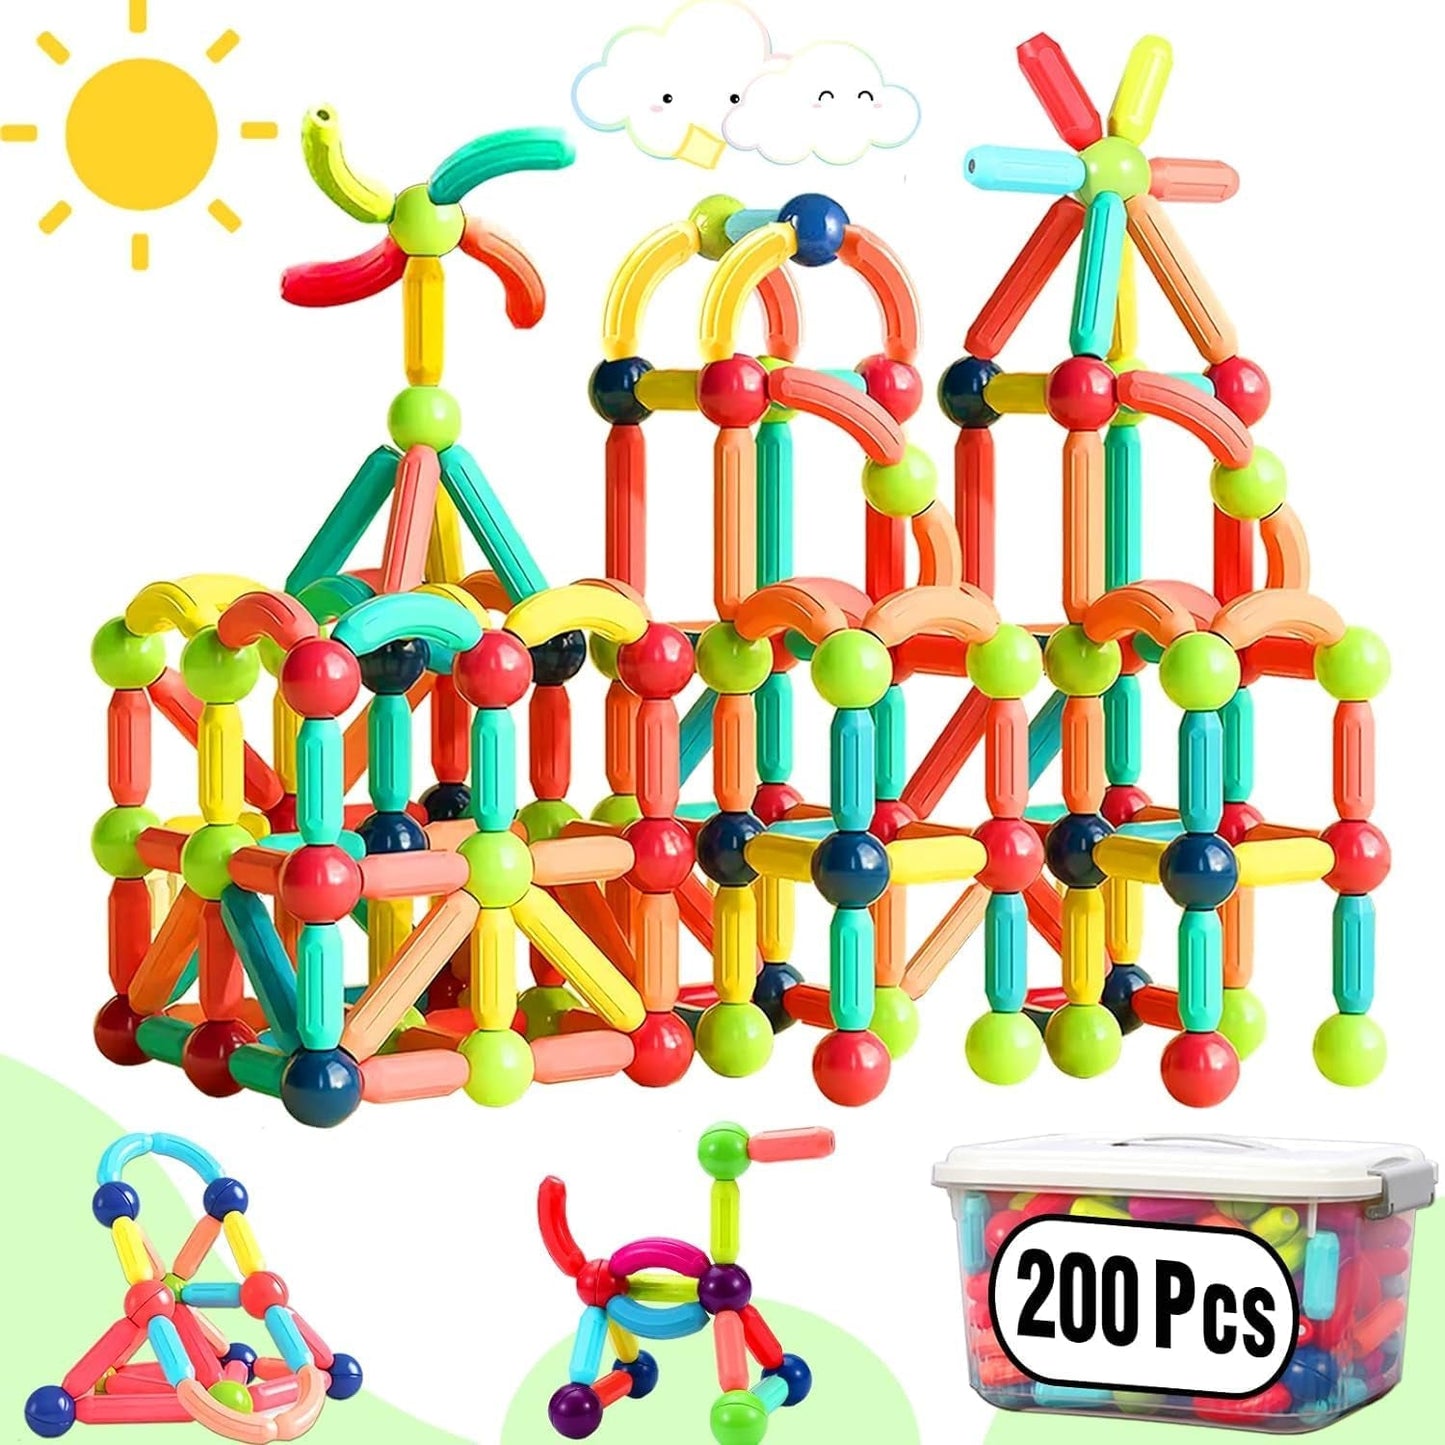 AZEN 100PCS Magnetic Toys Building Blocks, Magnets for Kids 3 4 5 6 Year Old, Toddler Toys Age 3-5 for Boys Girls, Magnetic Balls and Magnet Rods Toy Building Set, Magnetic Toys for Toddlers